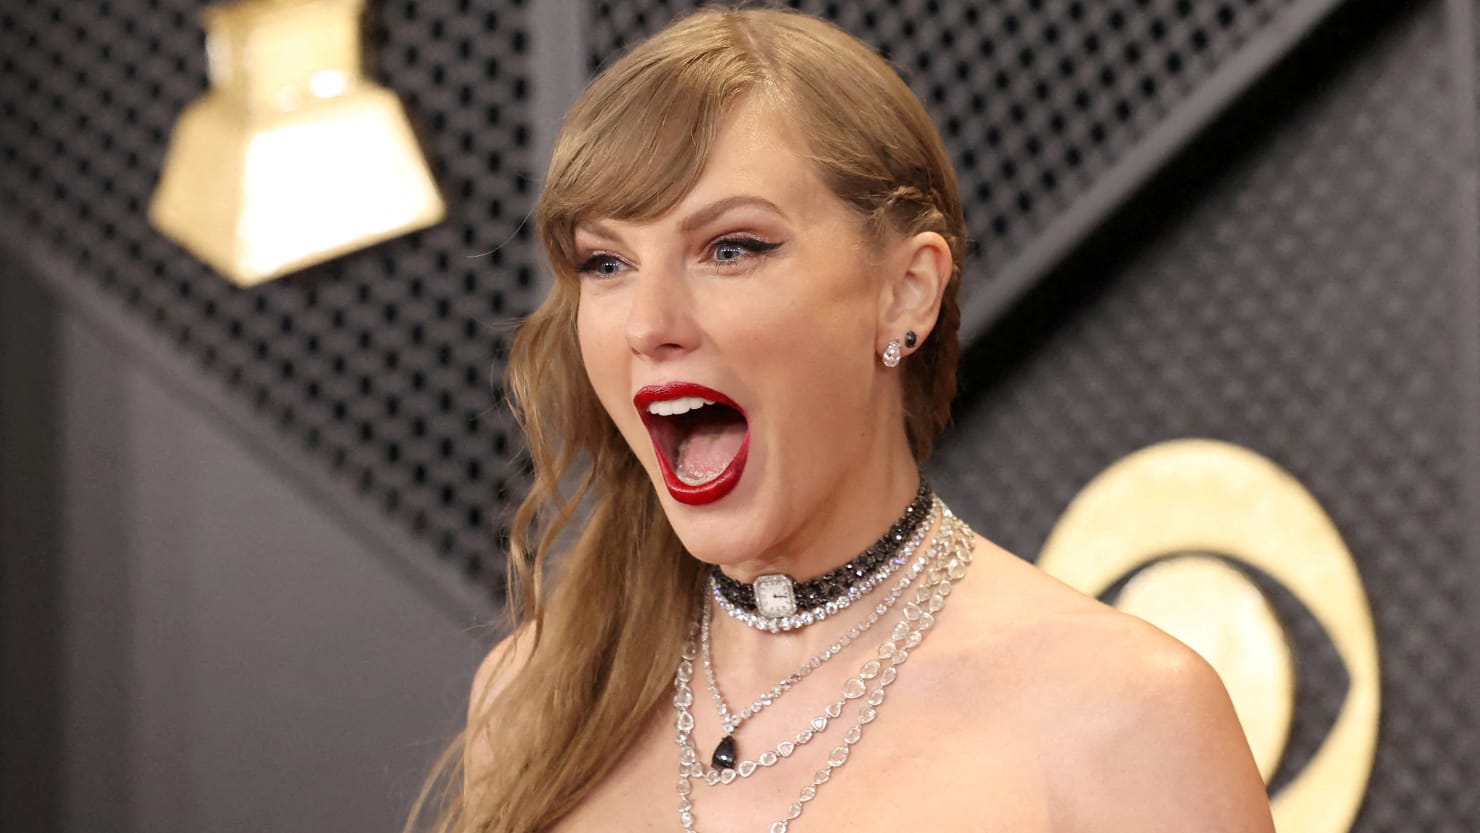 Taylor Swift’s ‘The Tortured Poets Department’ Album Sets New Records: Reacts with Overwhelming Gratitude